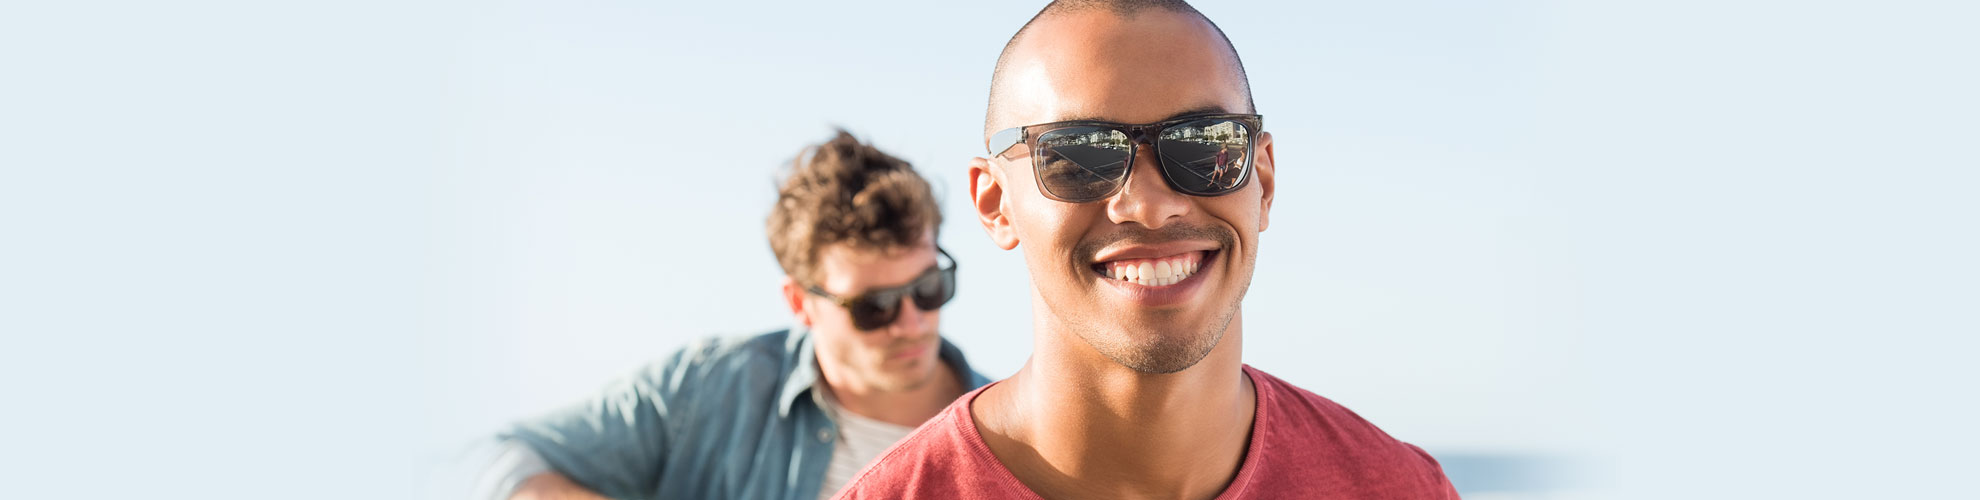 young men outside playing guitar wearing sunglasses smiling 